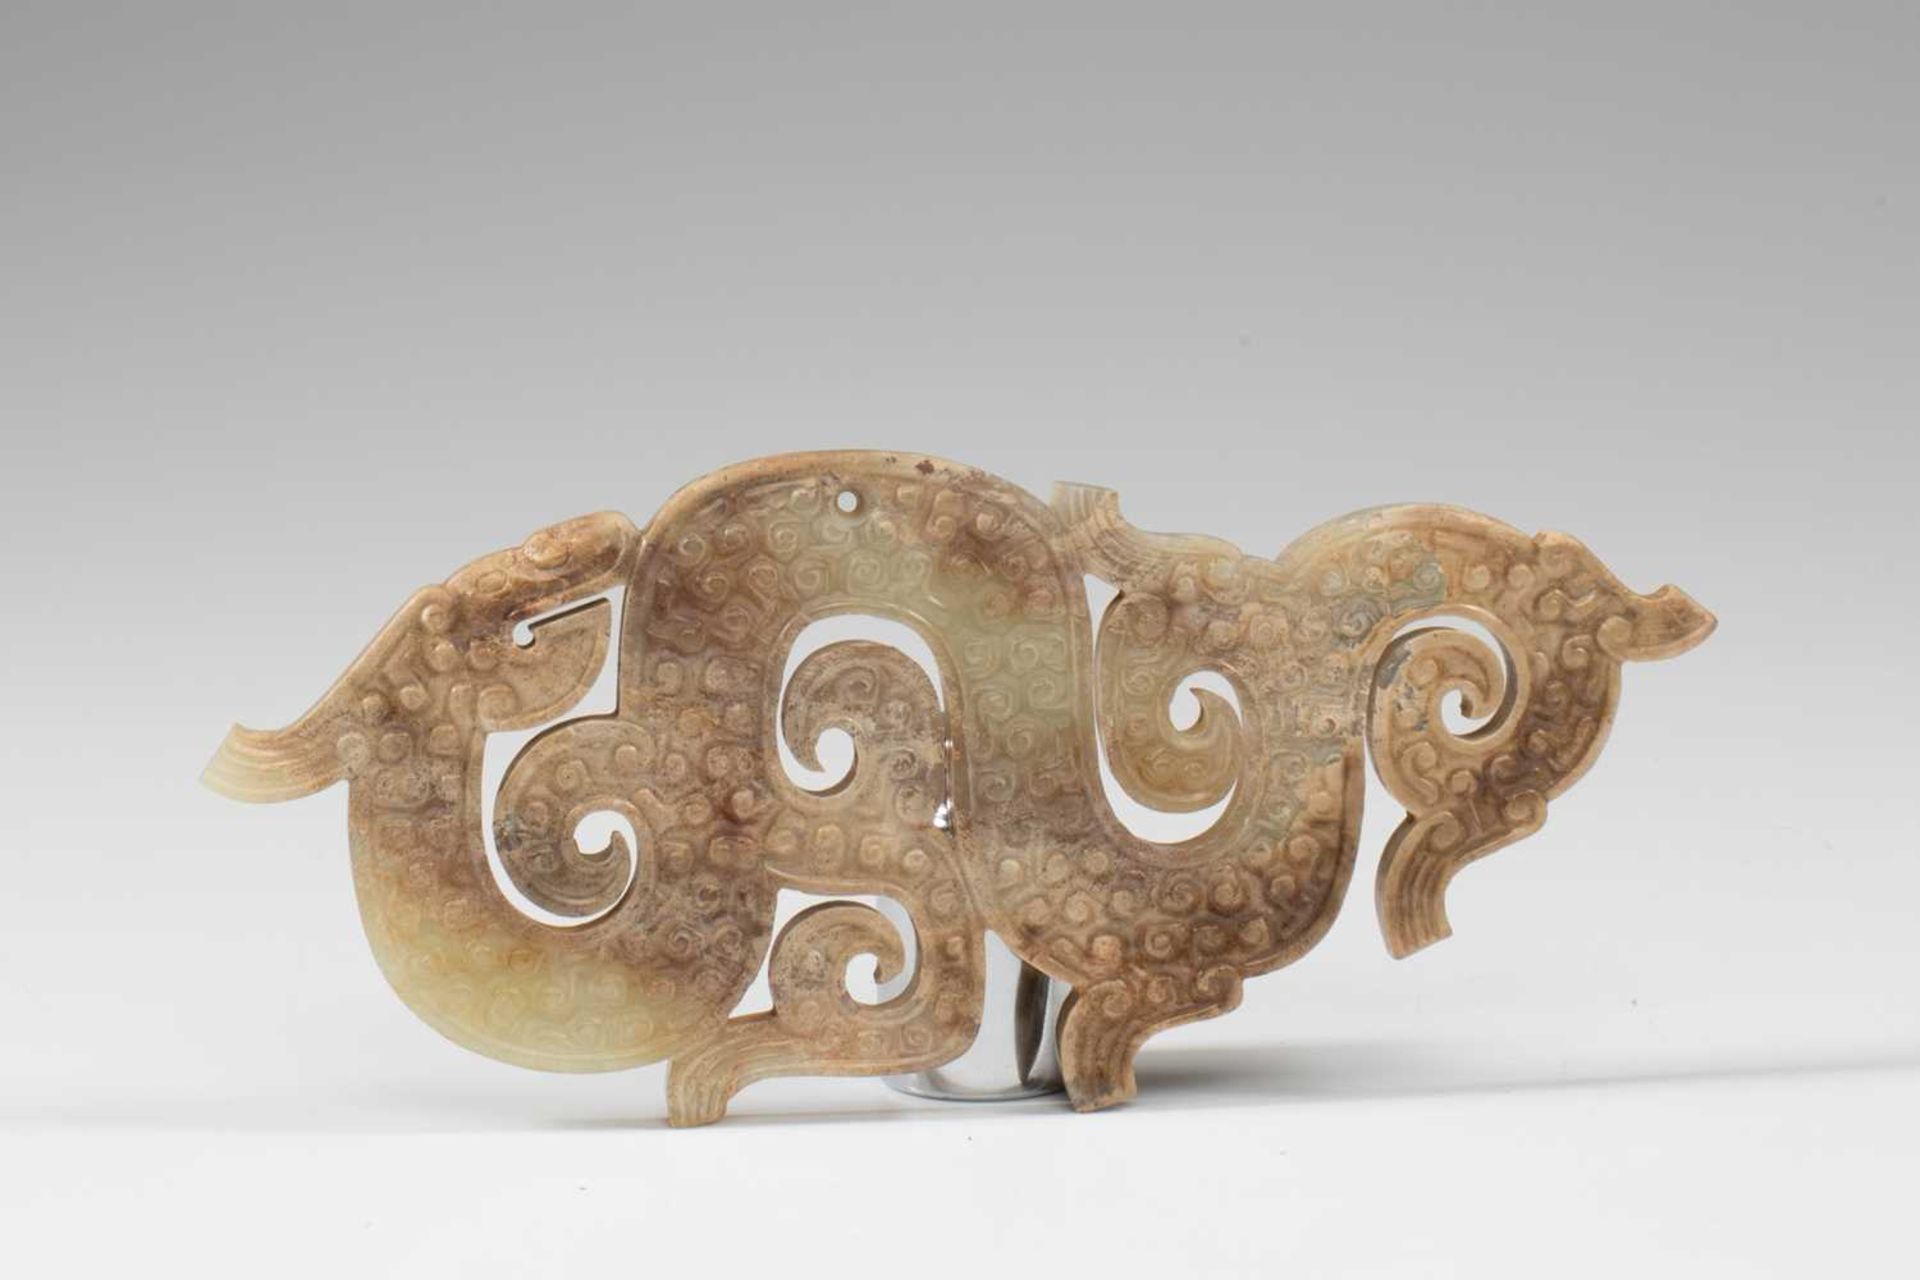 DRAGON-SHAPED PENDANT WITH CIRRUS CLOUD STRIPES